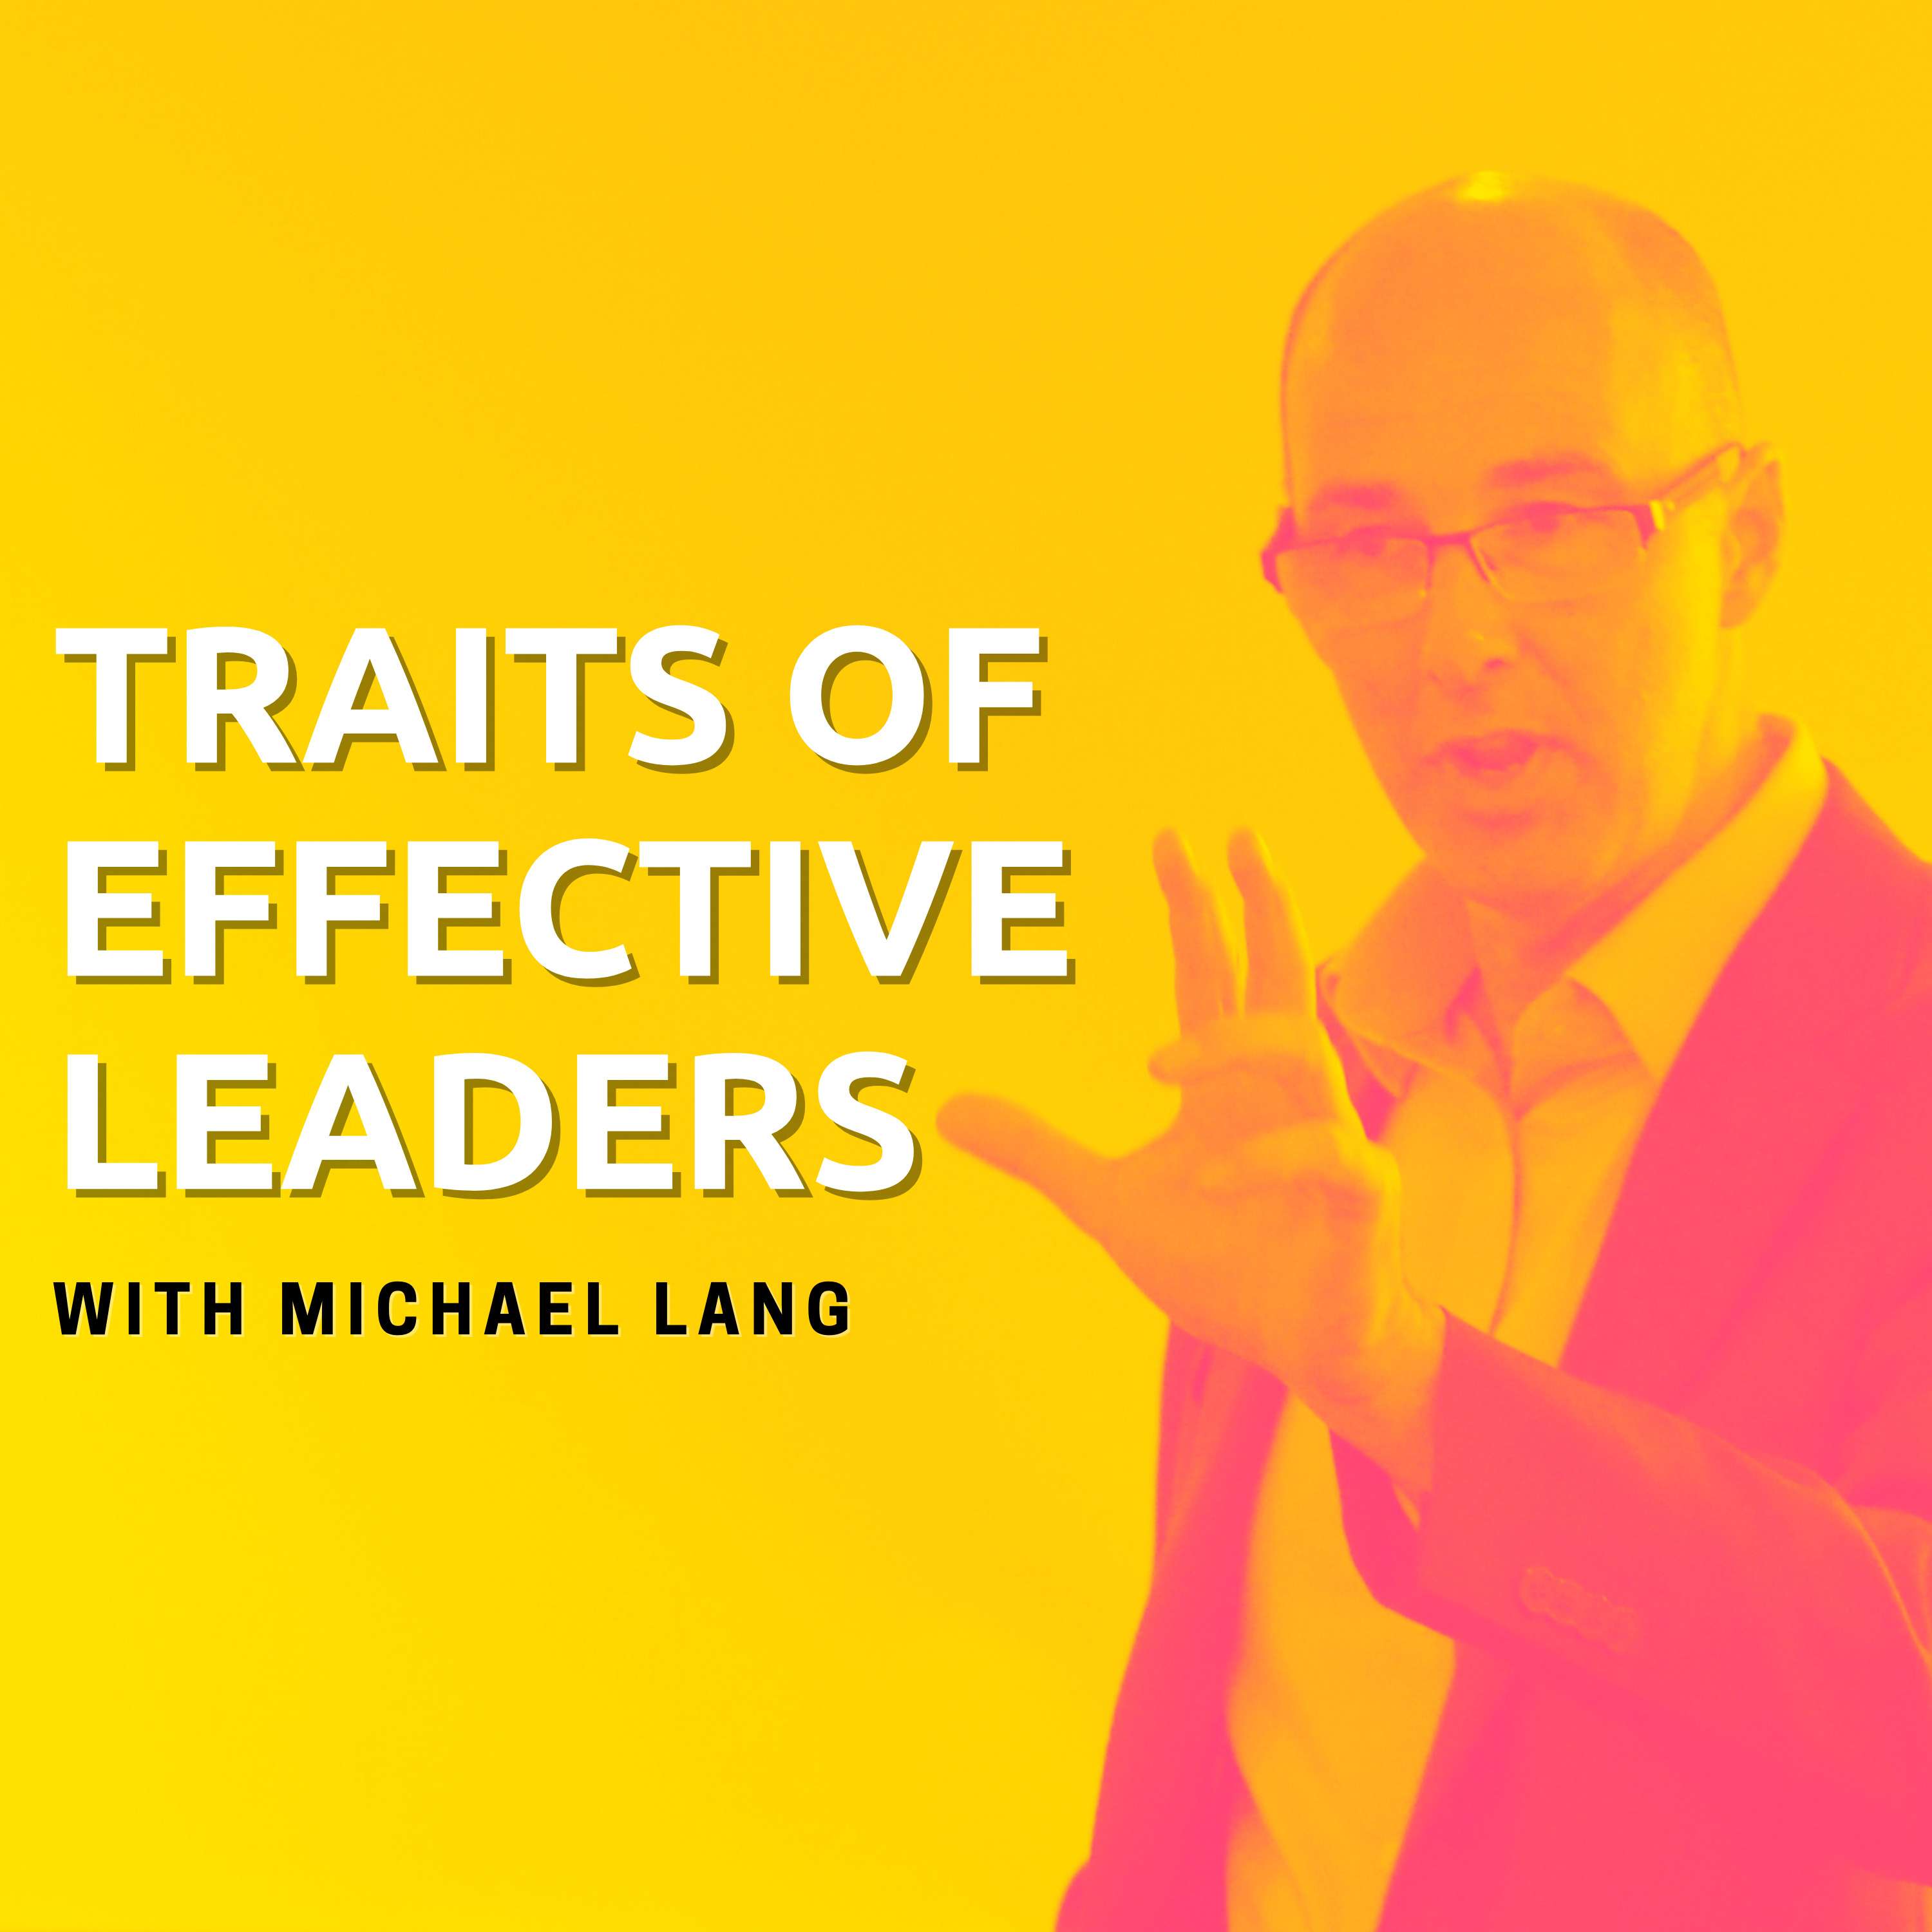 Traits of Effective Leaders - With Michael Lang